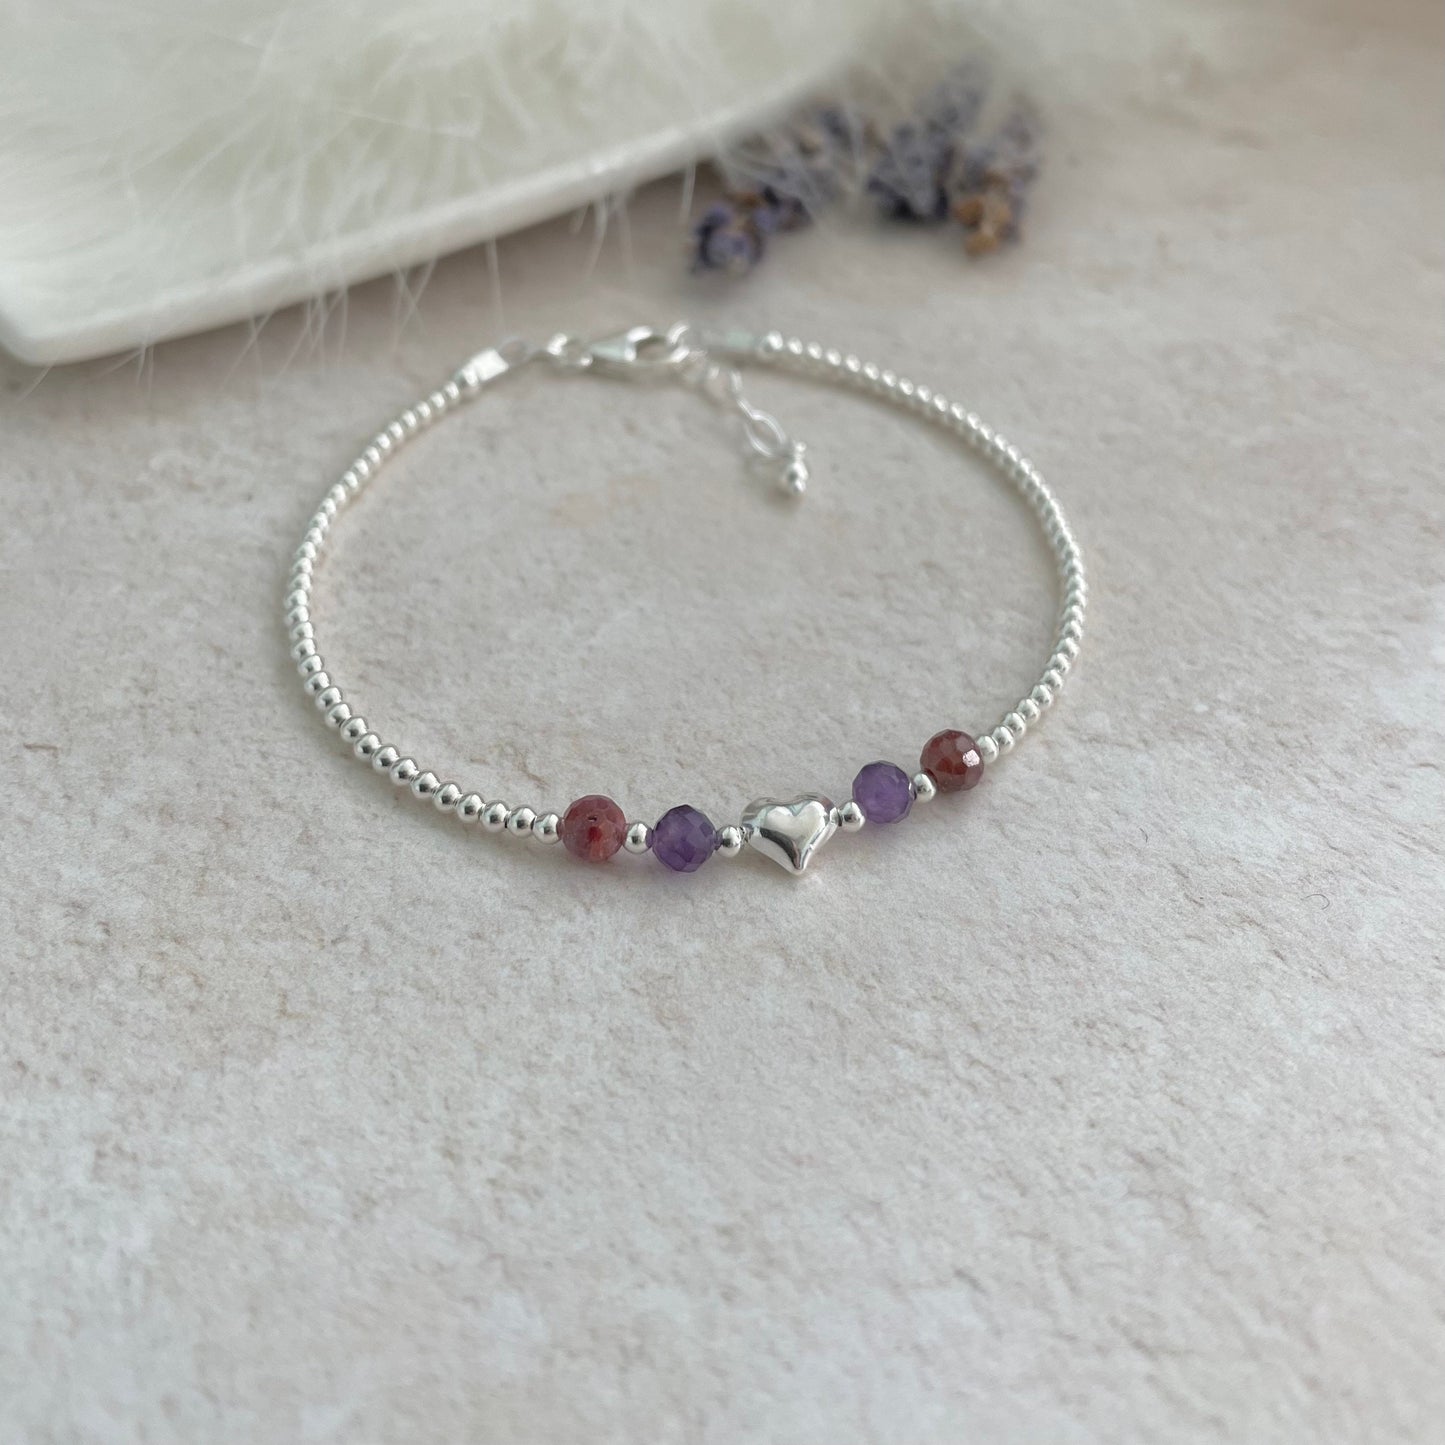 Personalised Family Birthstones Bracelet in Silver, Family Jewelry nft